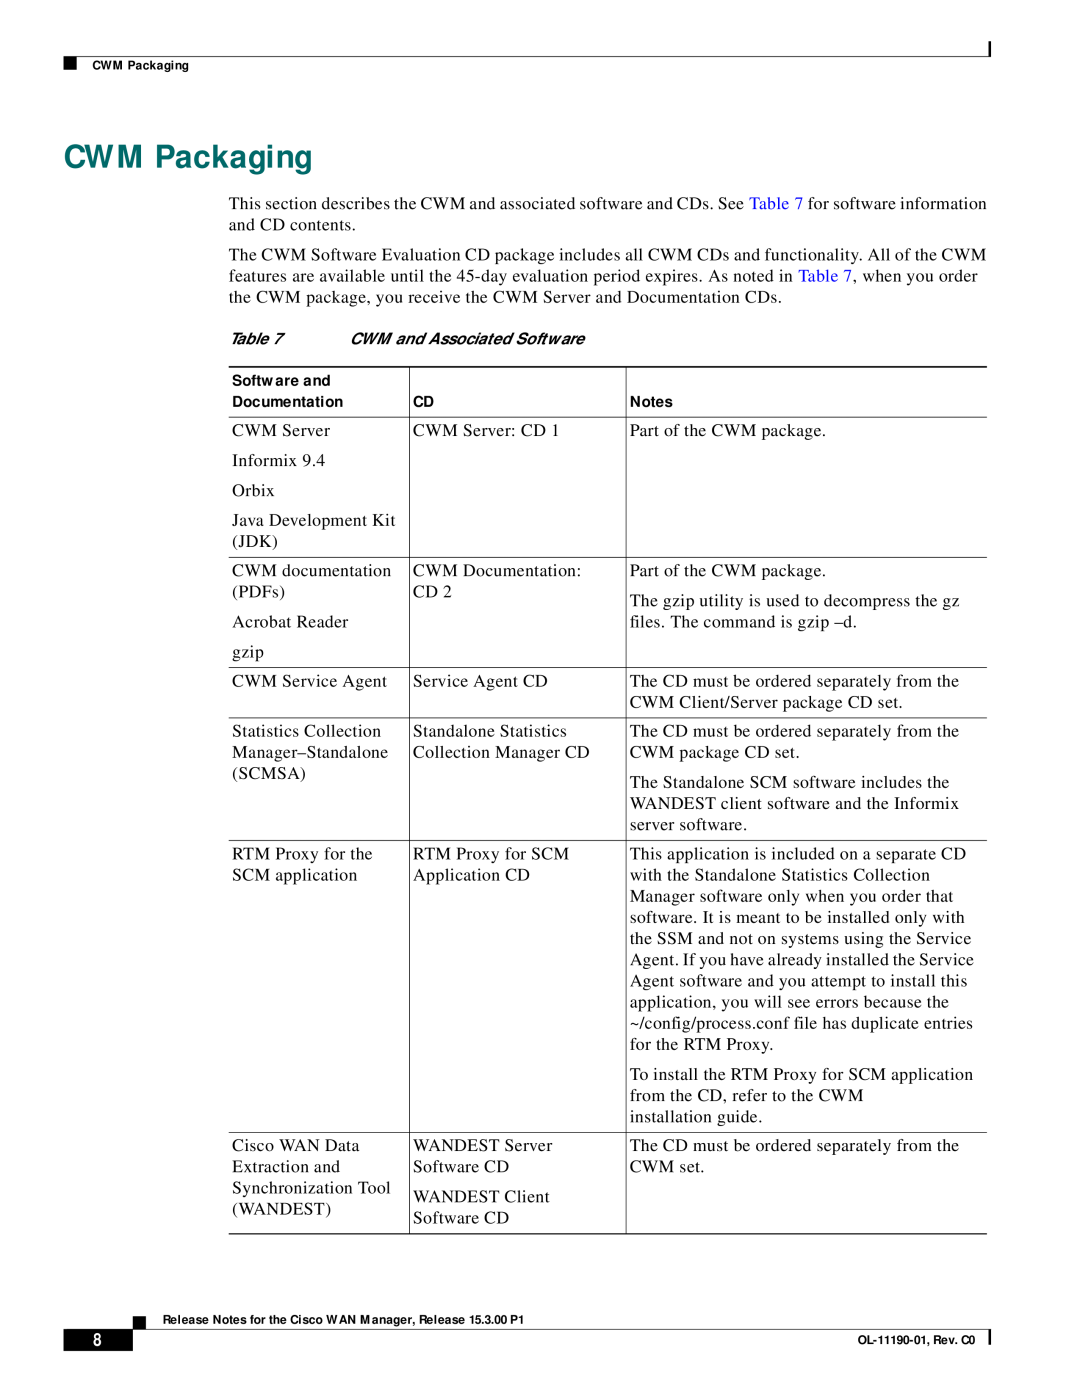 Cisco Systems 15.3.00P1 manual CWM Packaging, Software and 